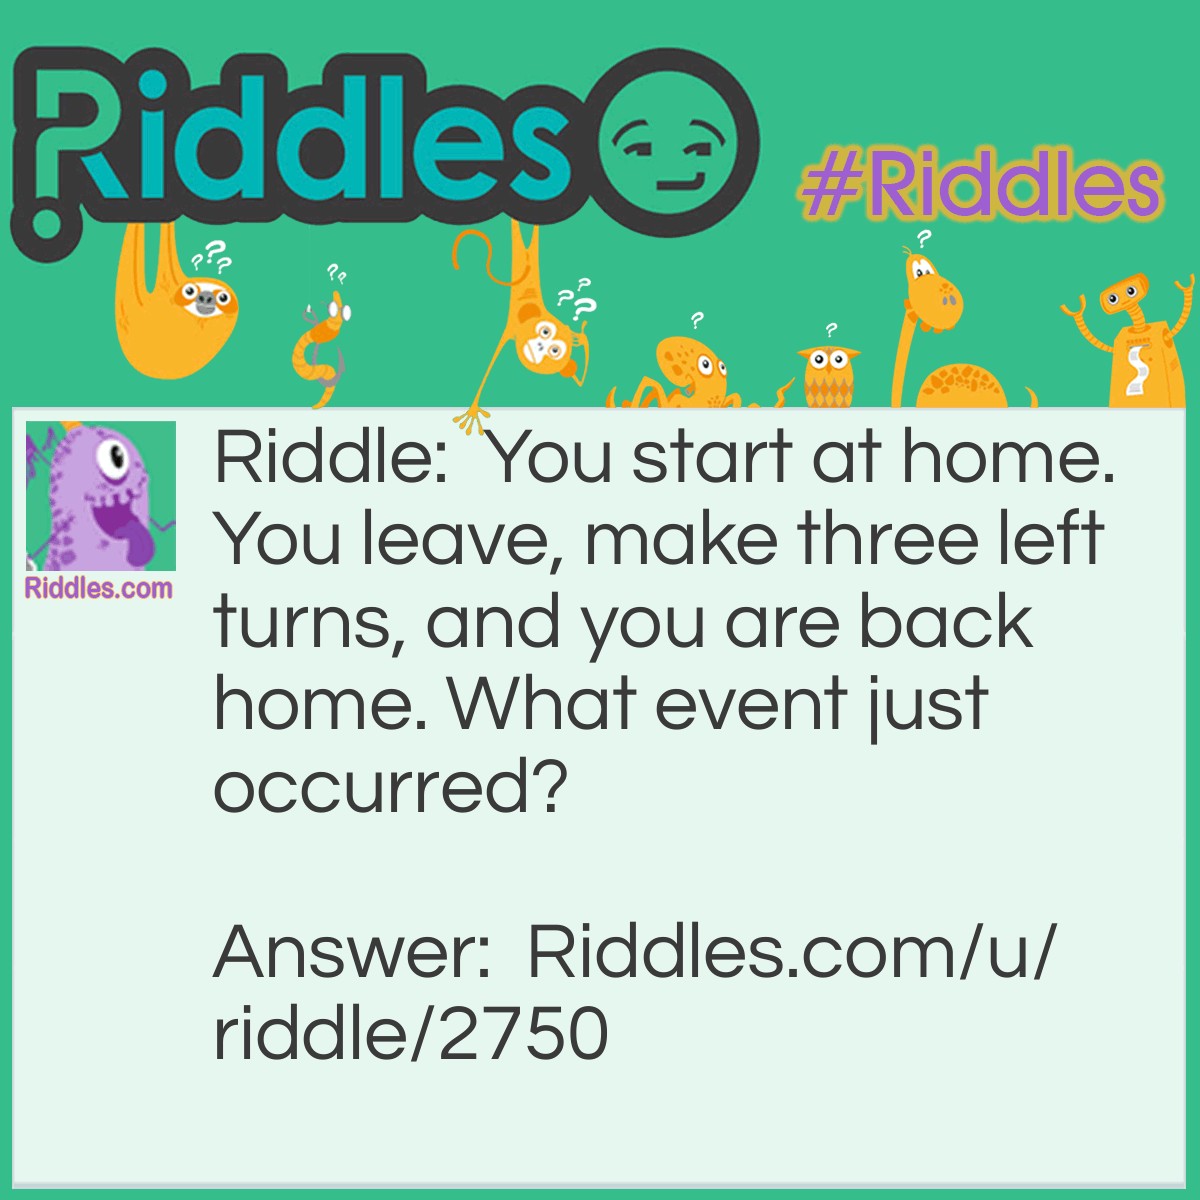 Riddle: You start at home. You leave, make three left turns, and you are back home. What event just occurred? Answer: A Home Run.